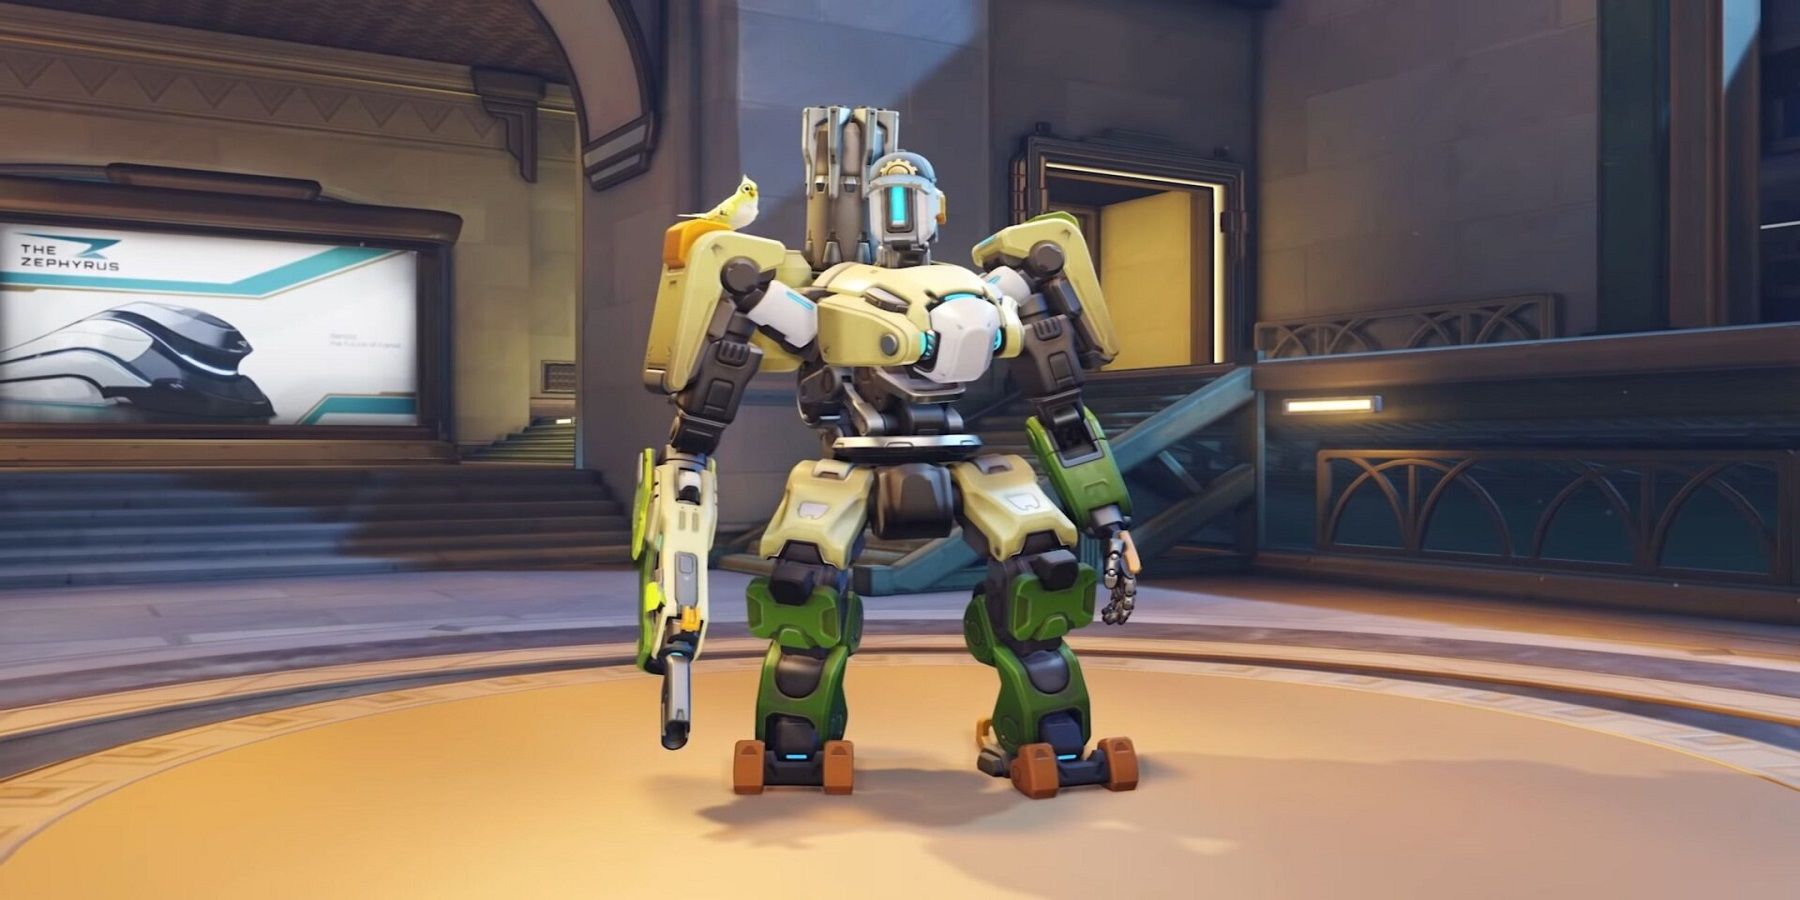 Bastion is getting a significant rework in Overwatch 2.